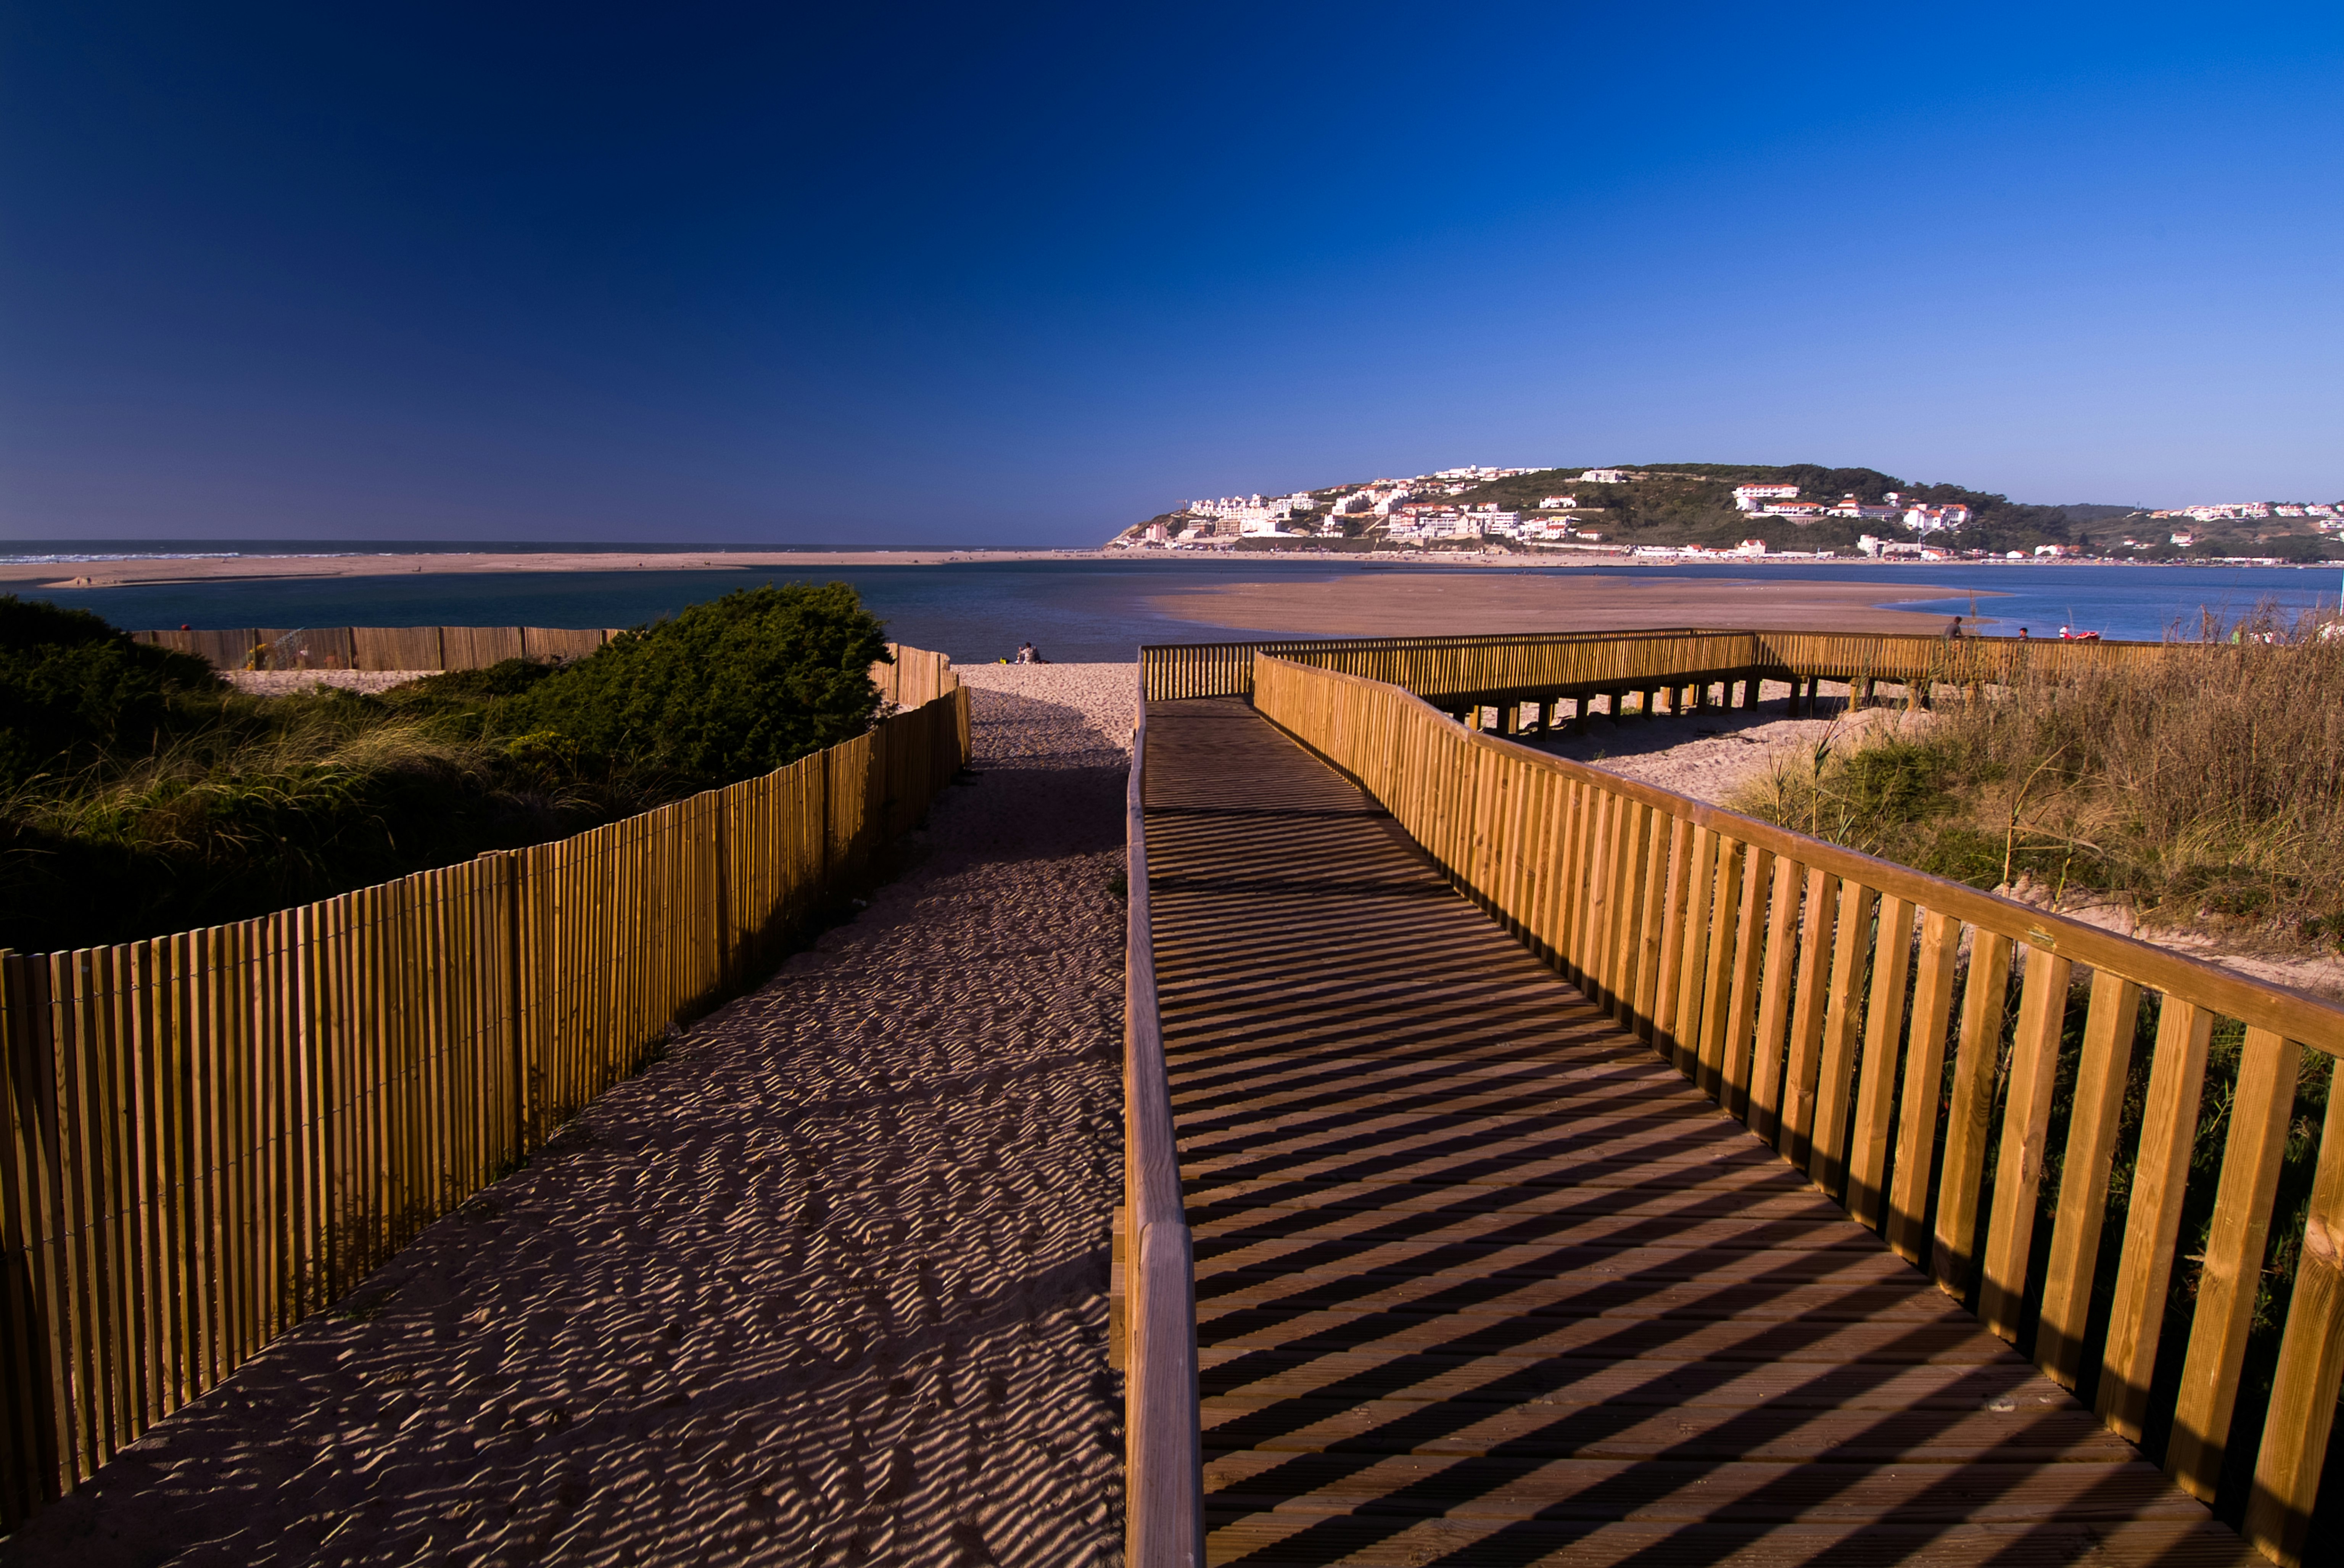 The golden hour sun casts long shadows across a raised boardwalk over sand dunes. The boardwalk stretches ahead, and the sea is is beyond. In the distance is a village with white buildings on a forested hill.